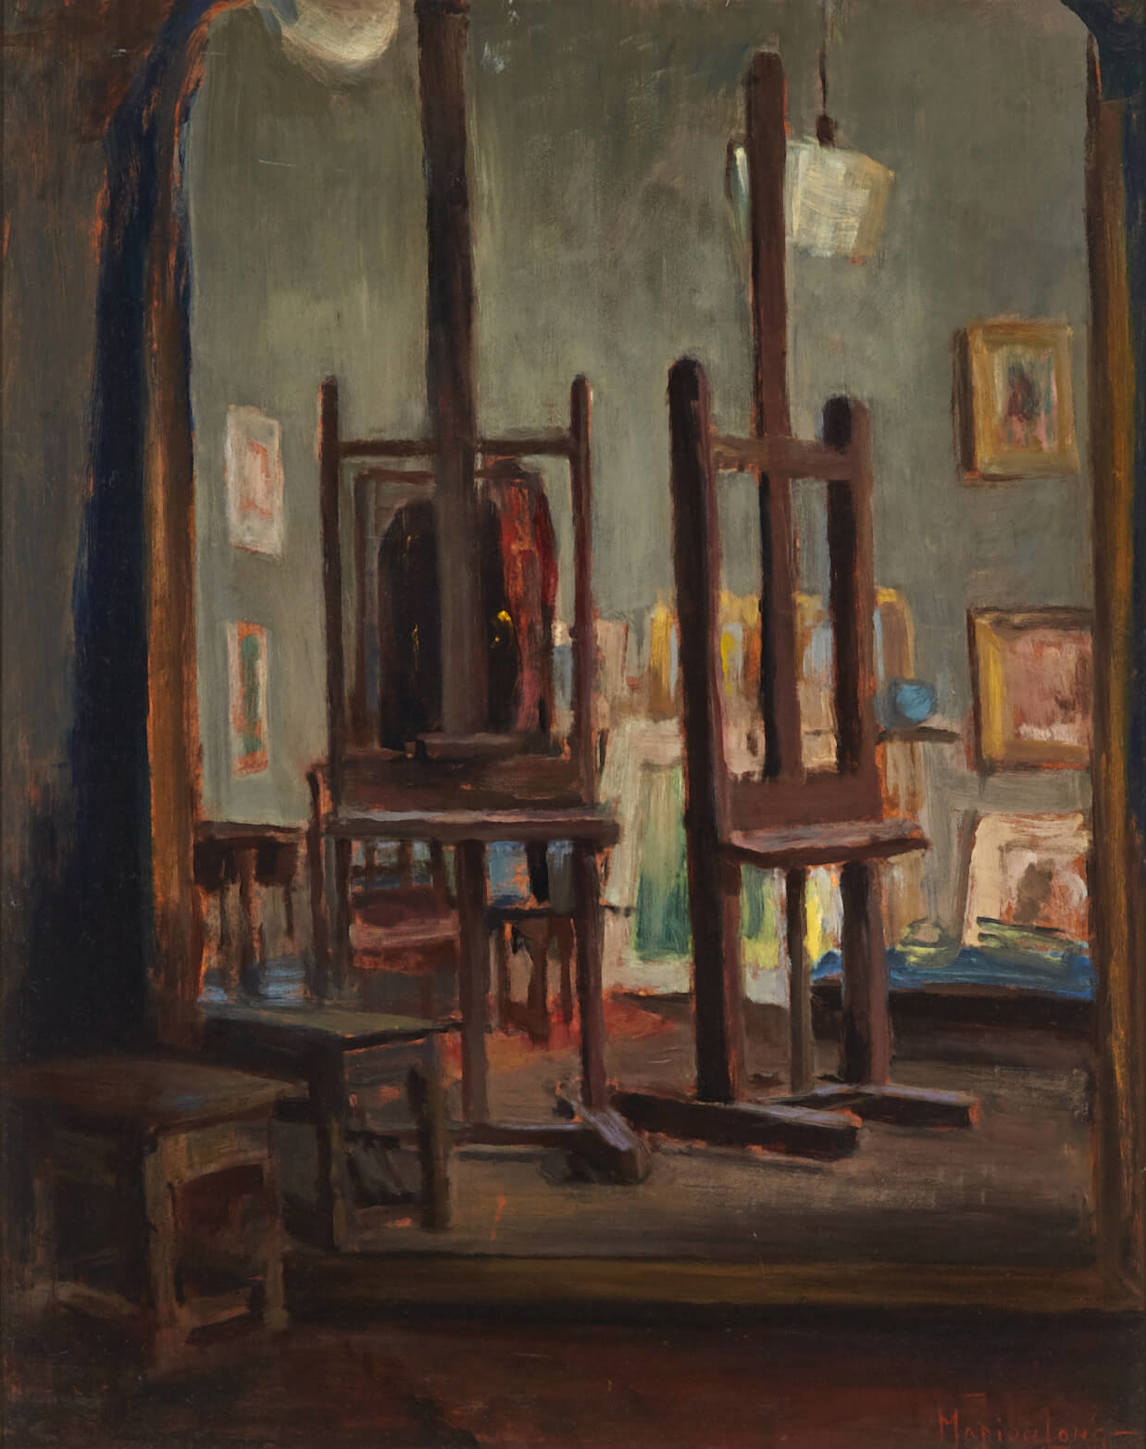  The Artists’s Studio, n.d., by Marion Long